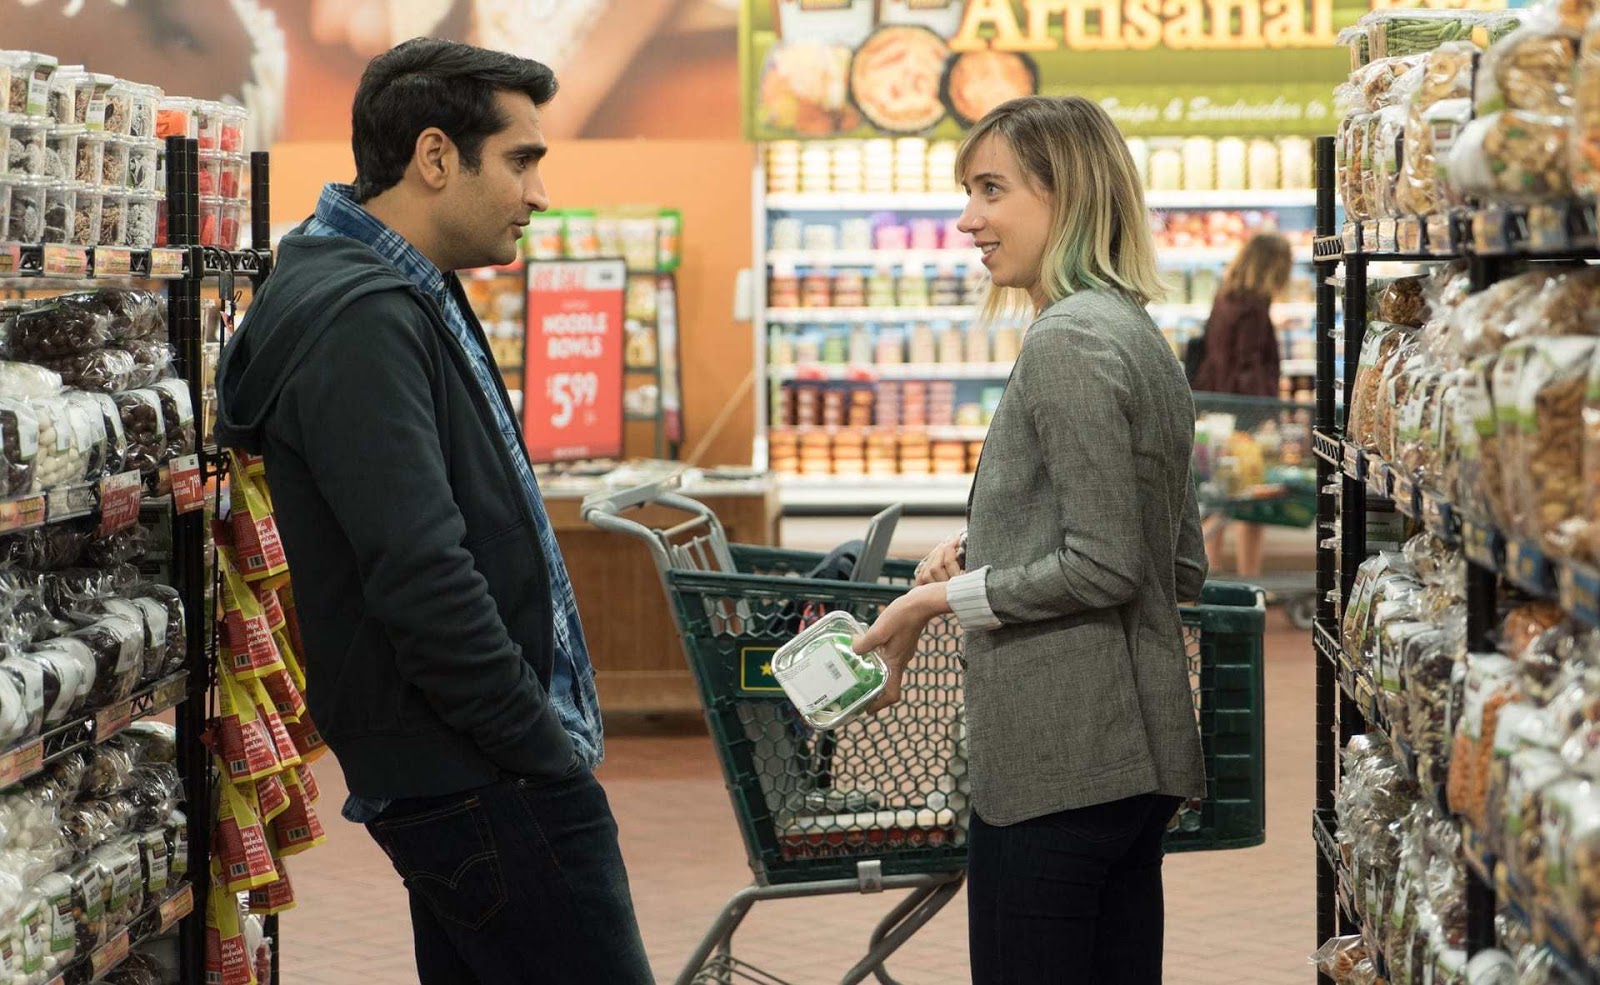 MOVIES: The Big Sick - Review